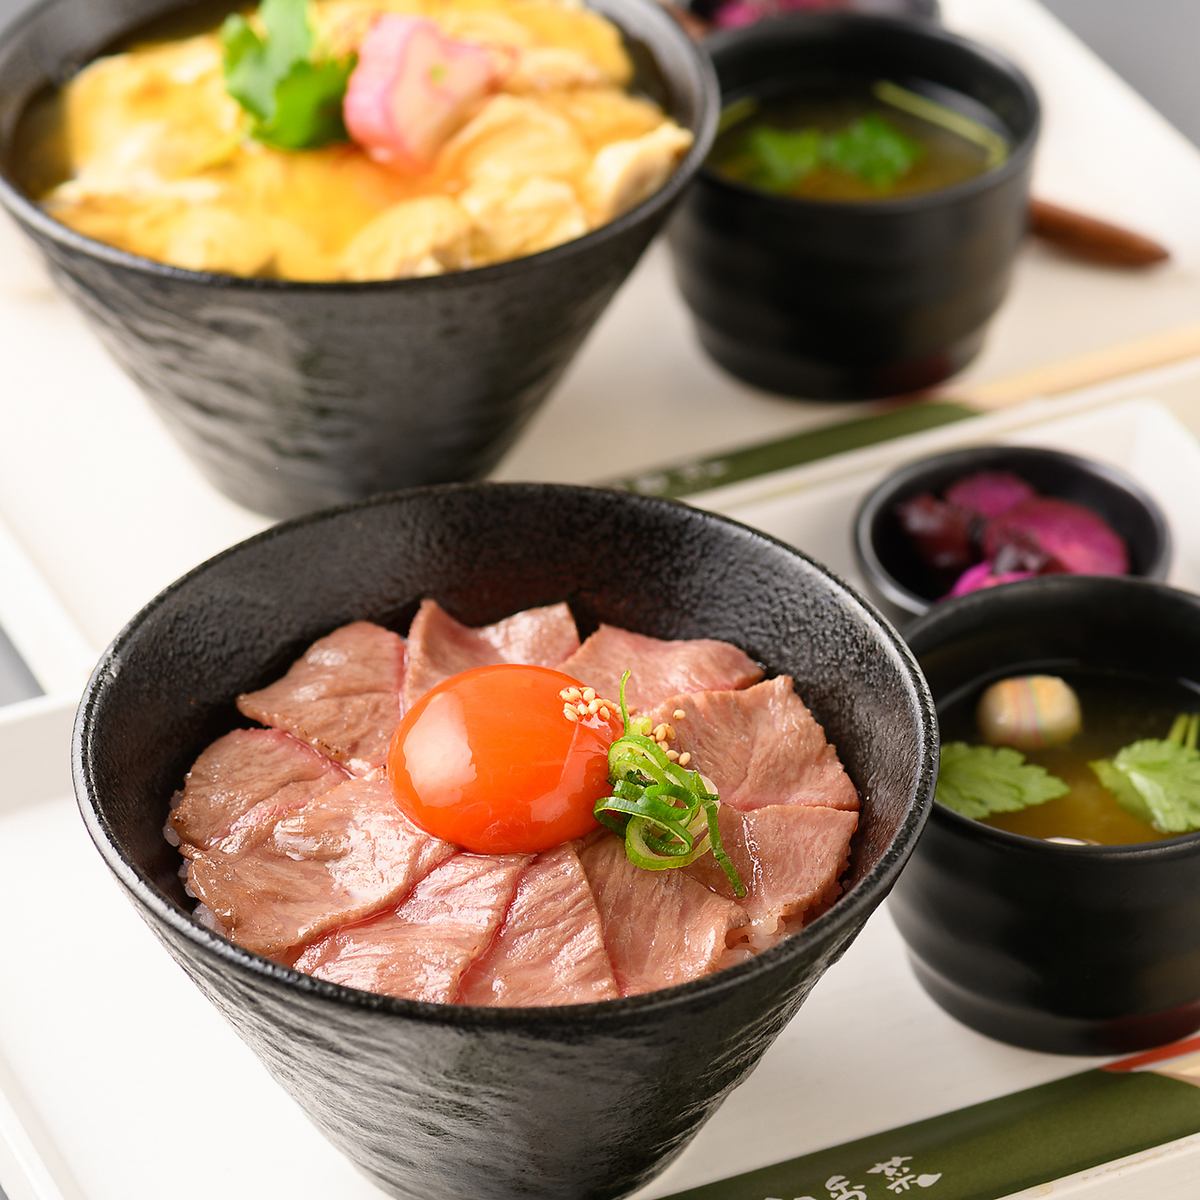 We offer high-quality meat supervised by the head chef of a famous yakiniku restaurant in Kyoto.